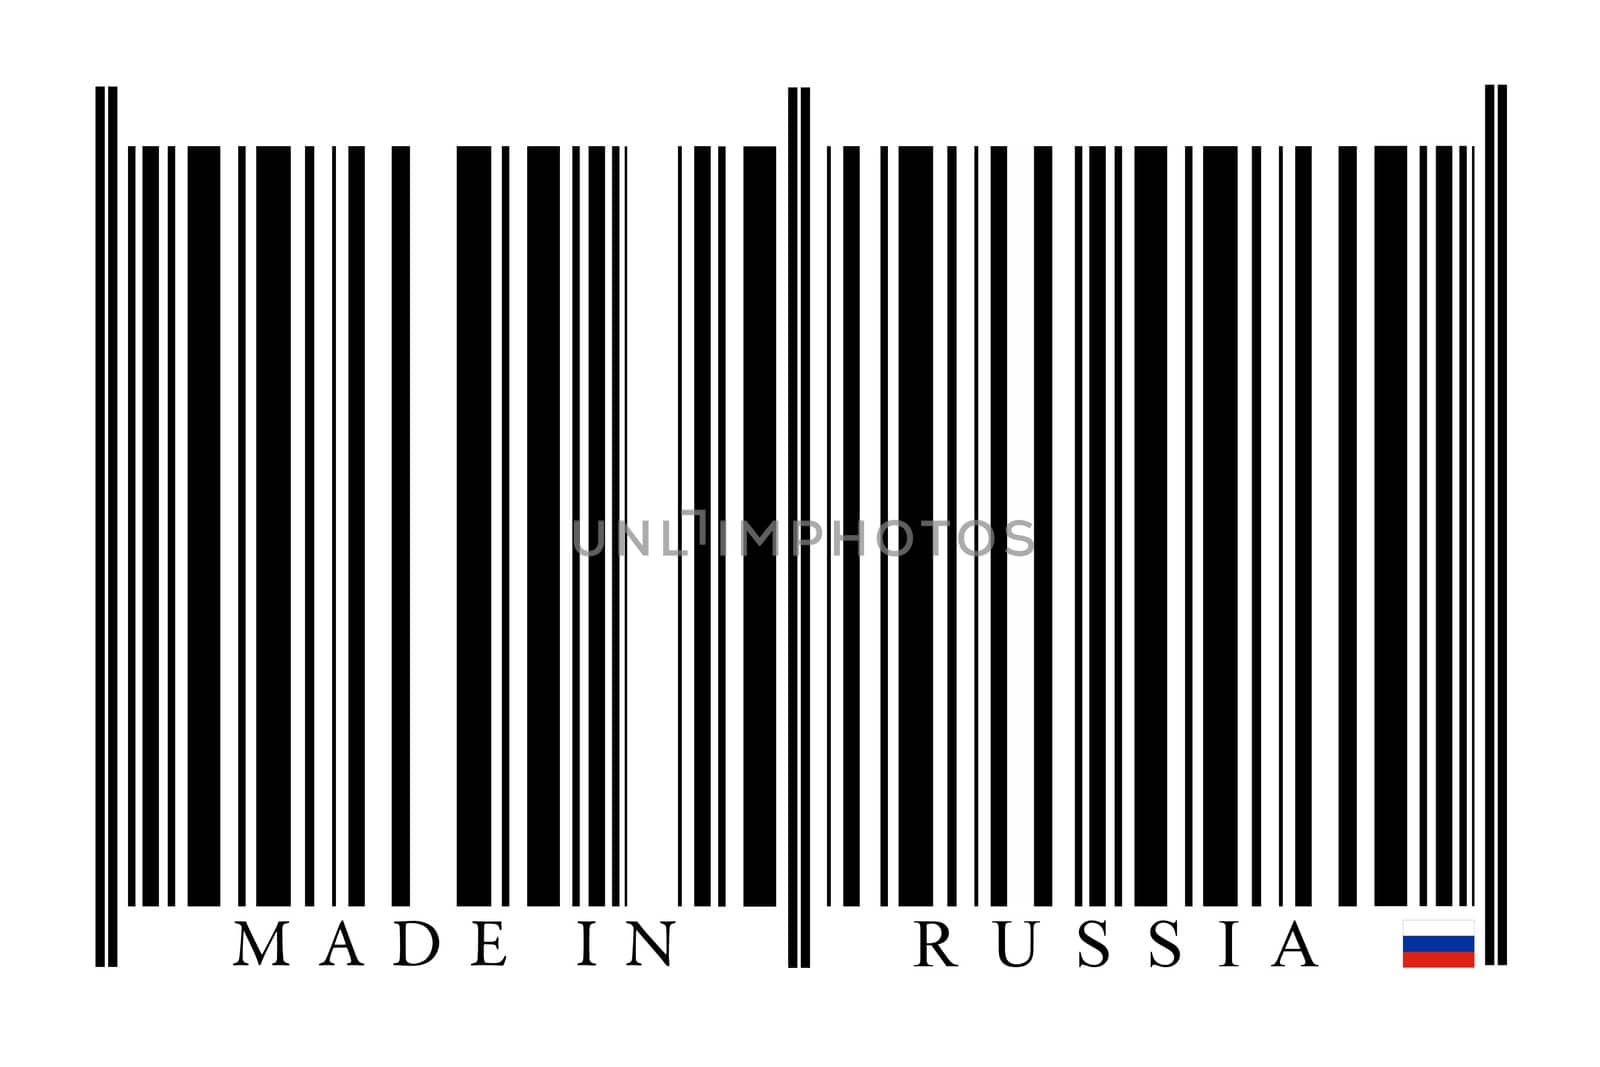 Russia Barcode on white background